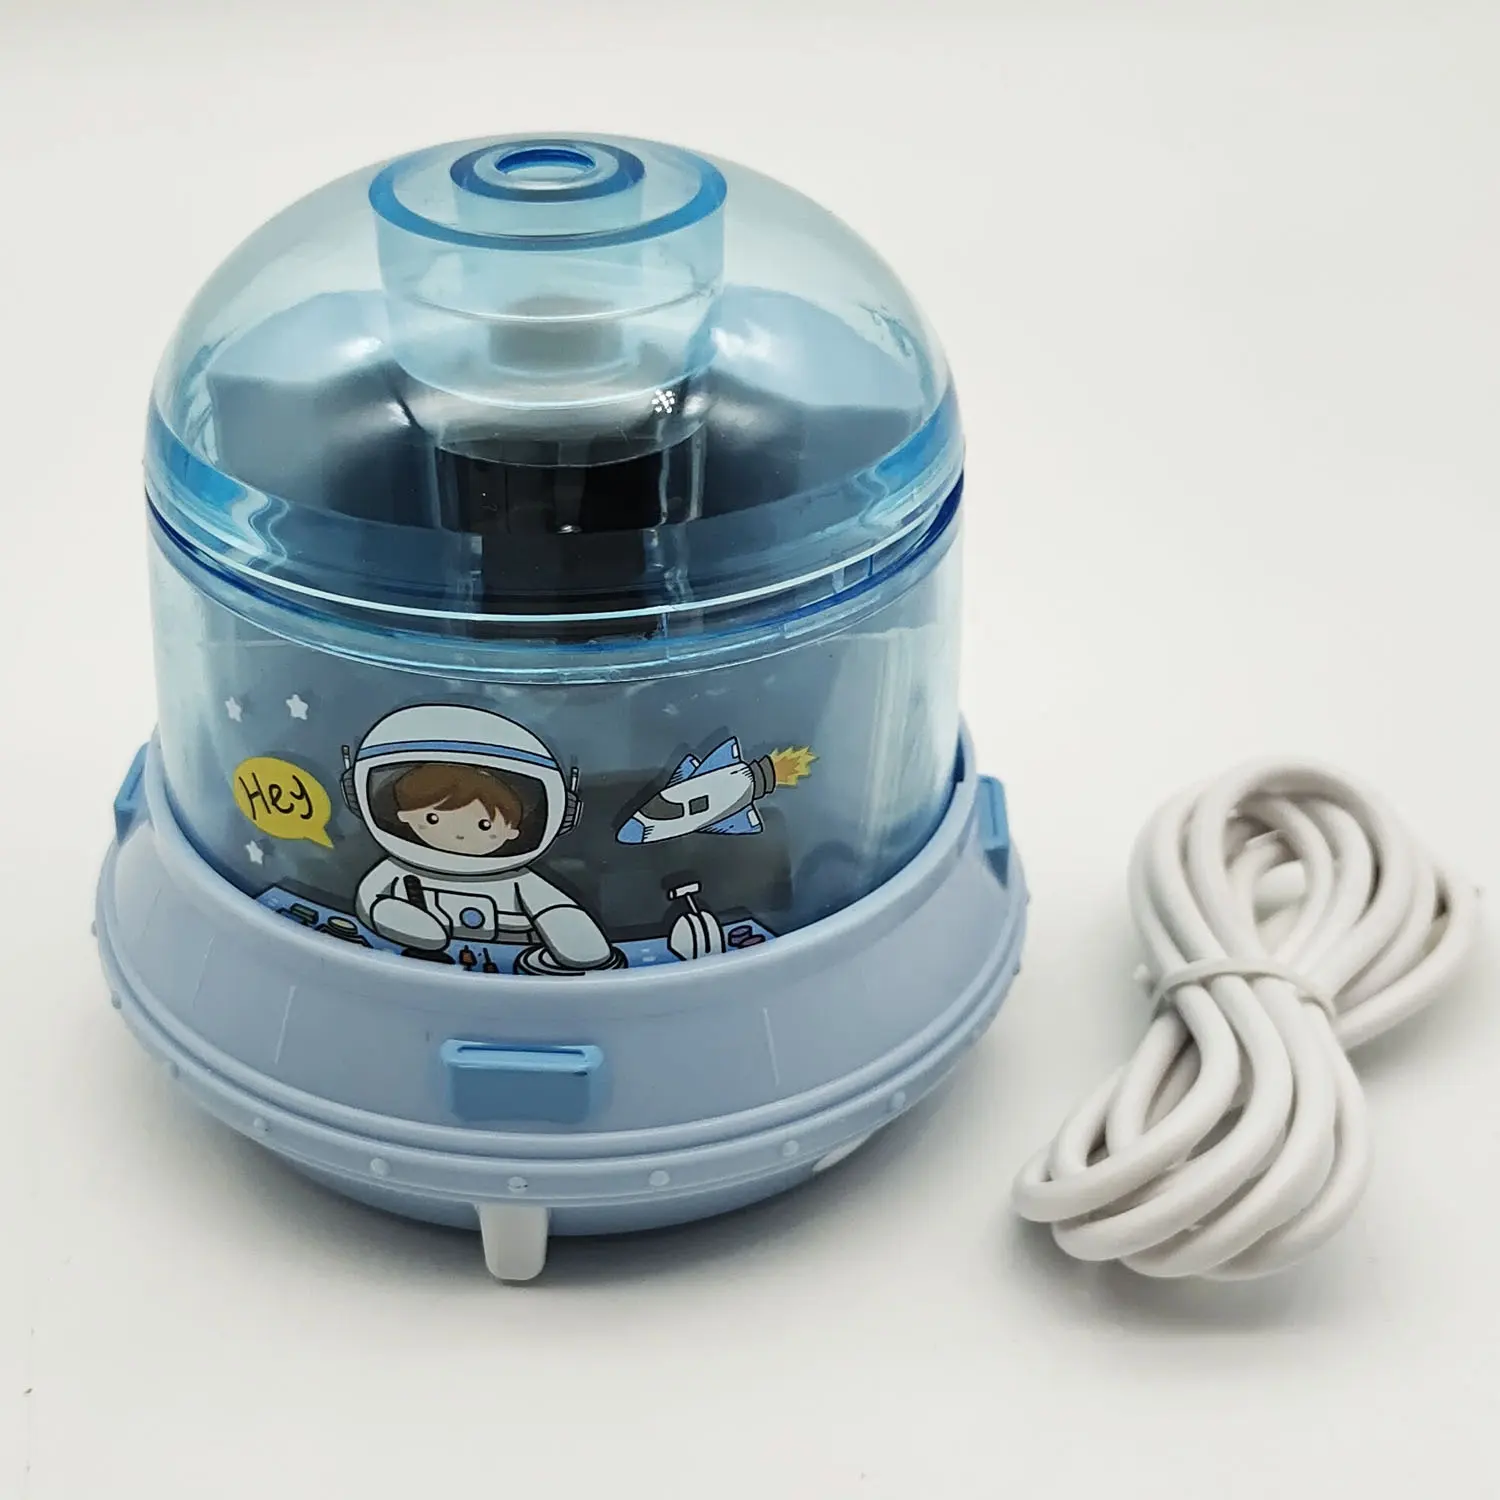 Automatic Pencil Sharpener Mini Office Cartoon Automatic USB Battery Electric Student Auto Sacapunta Stationery Plastic Spaceship Blue Sharpener For Pencil